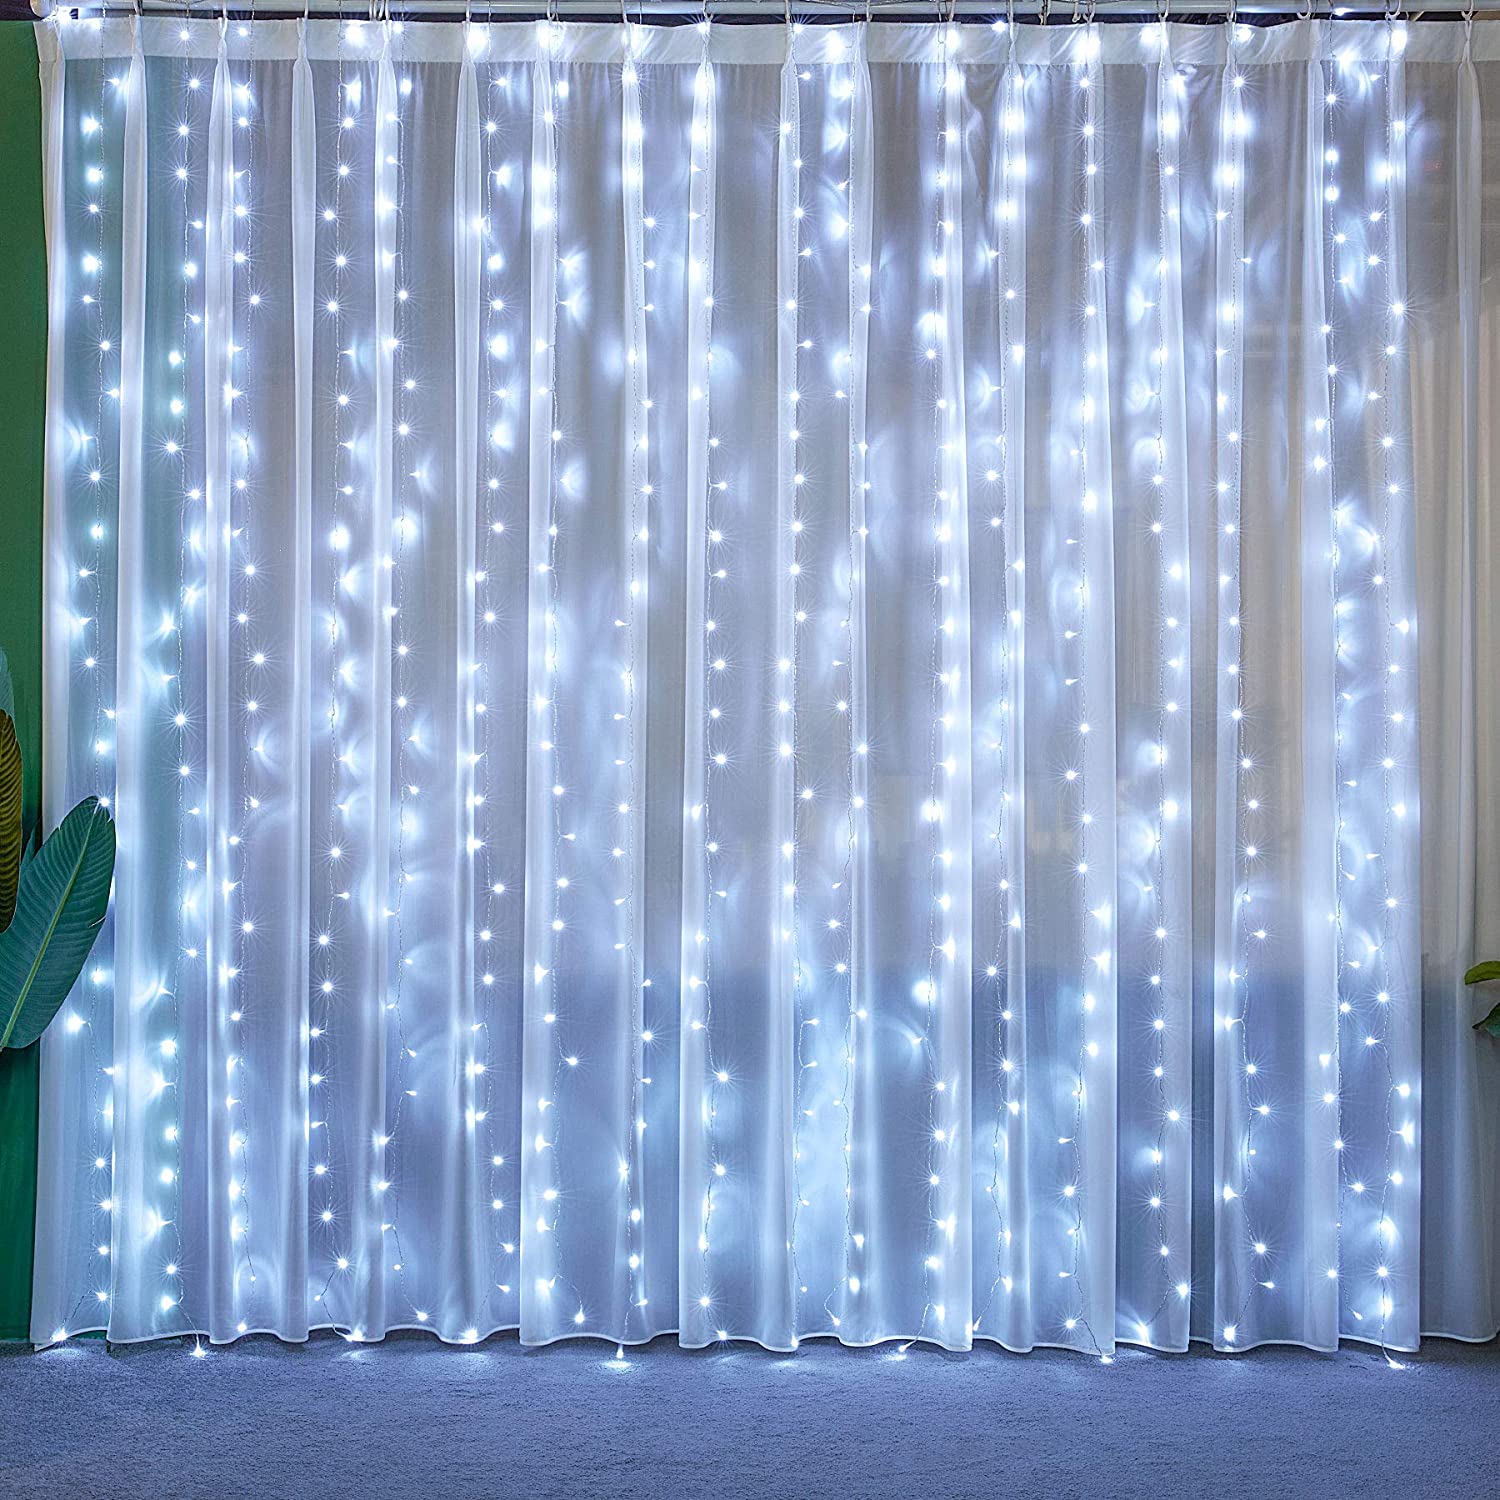 Yinuo Candle Electric Curtain Indoor String Lights, 9.8-Foot